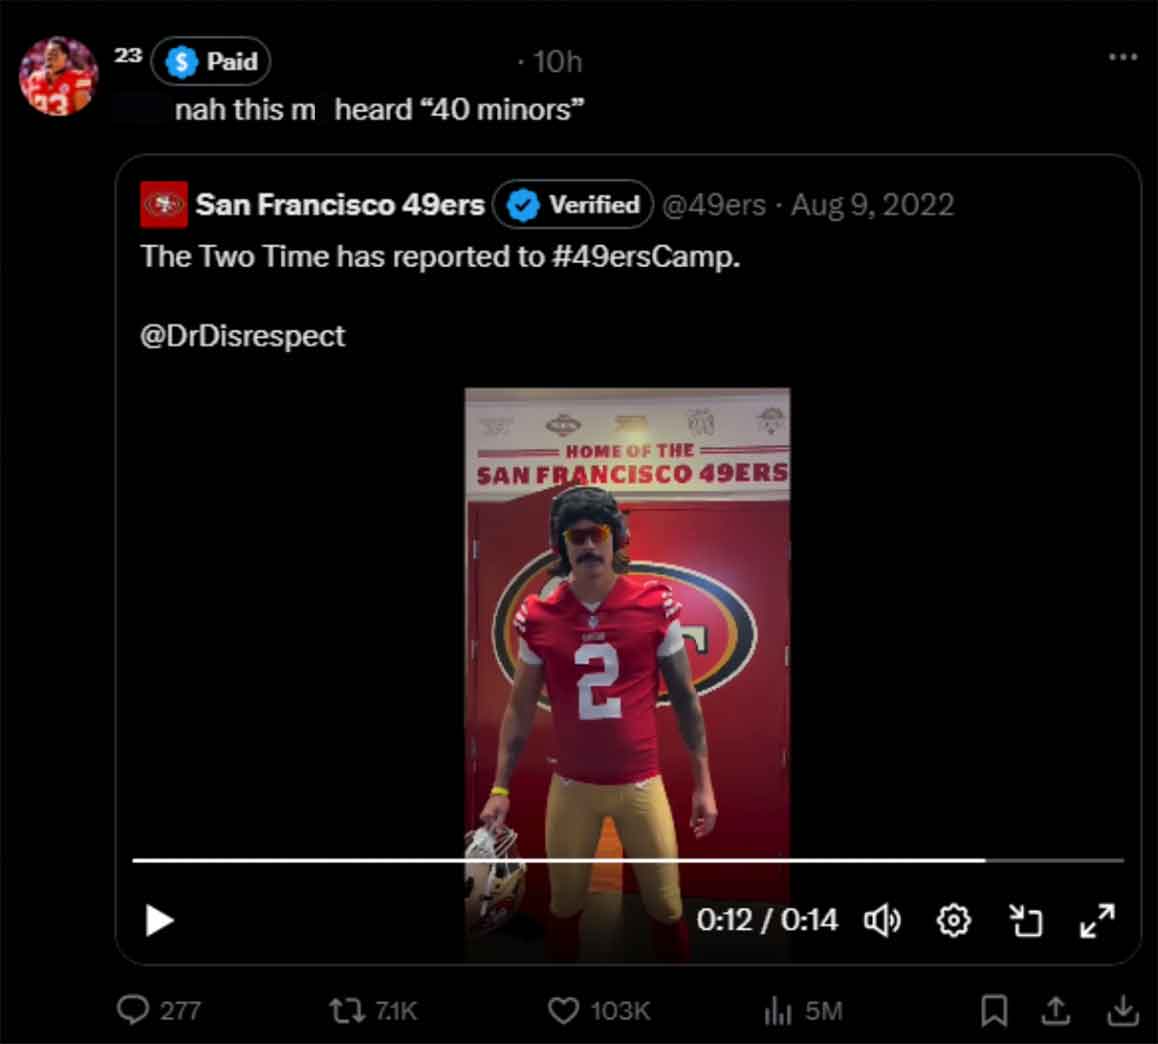 screenshot - 23 Paid 10h nah this m_heard 40 minors San Francisco 49ers Verified .. The Two Time has reported to . Home Of The San Francisco 49ERS 2 277 tl ill 5M